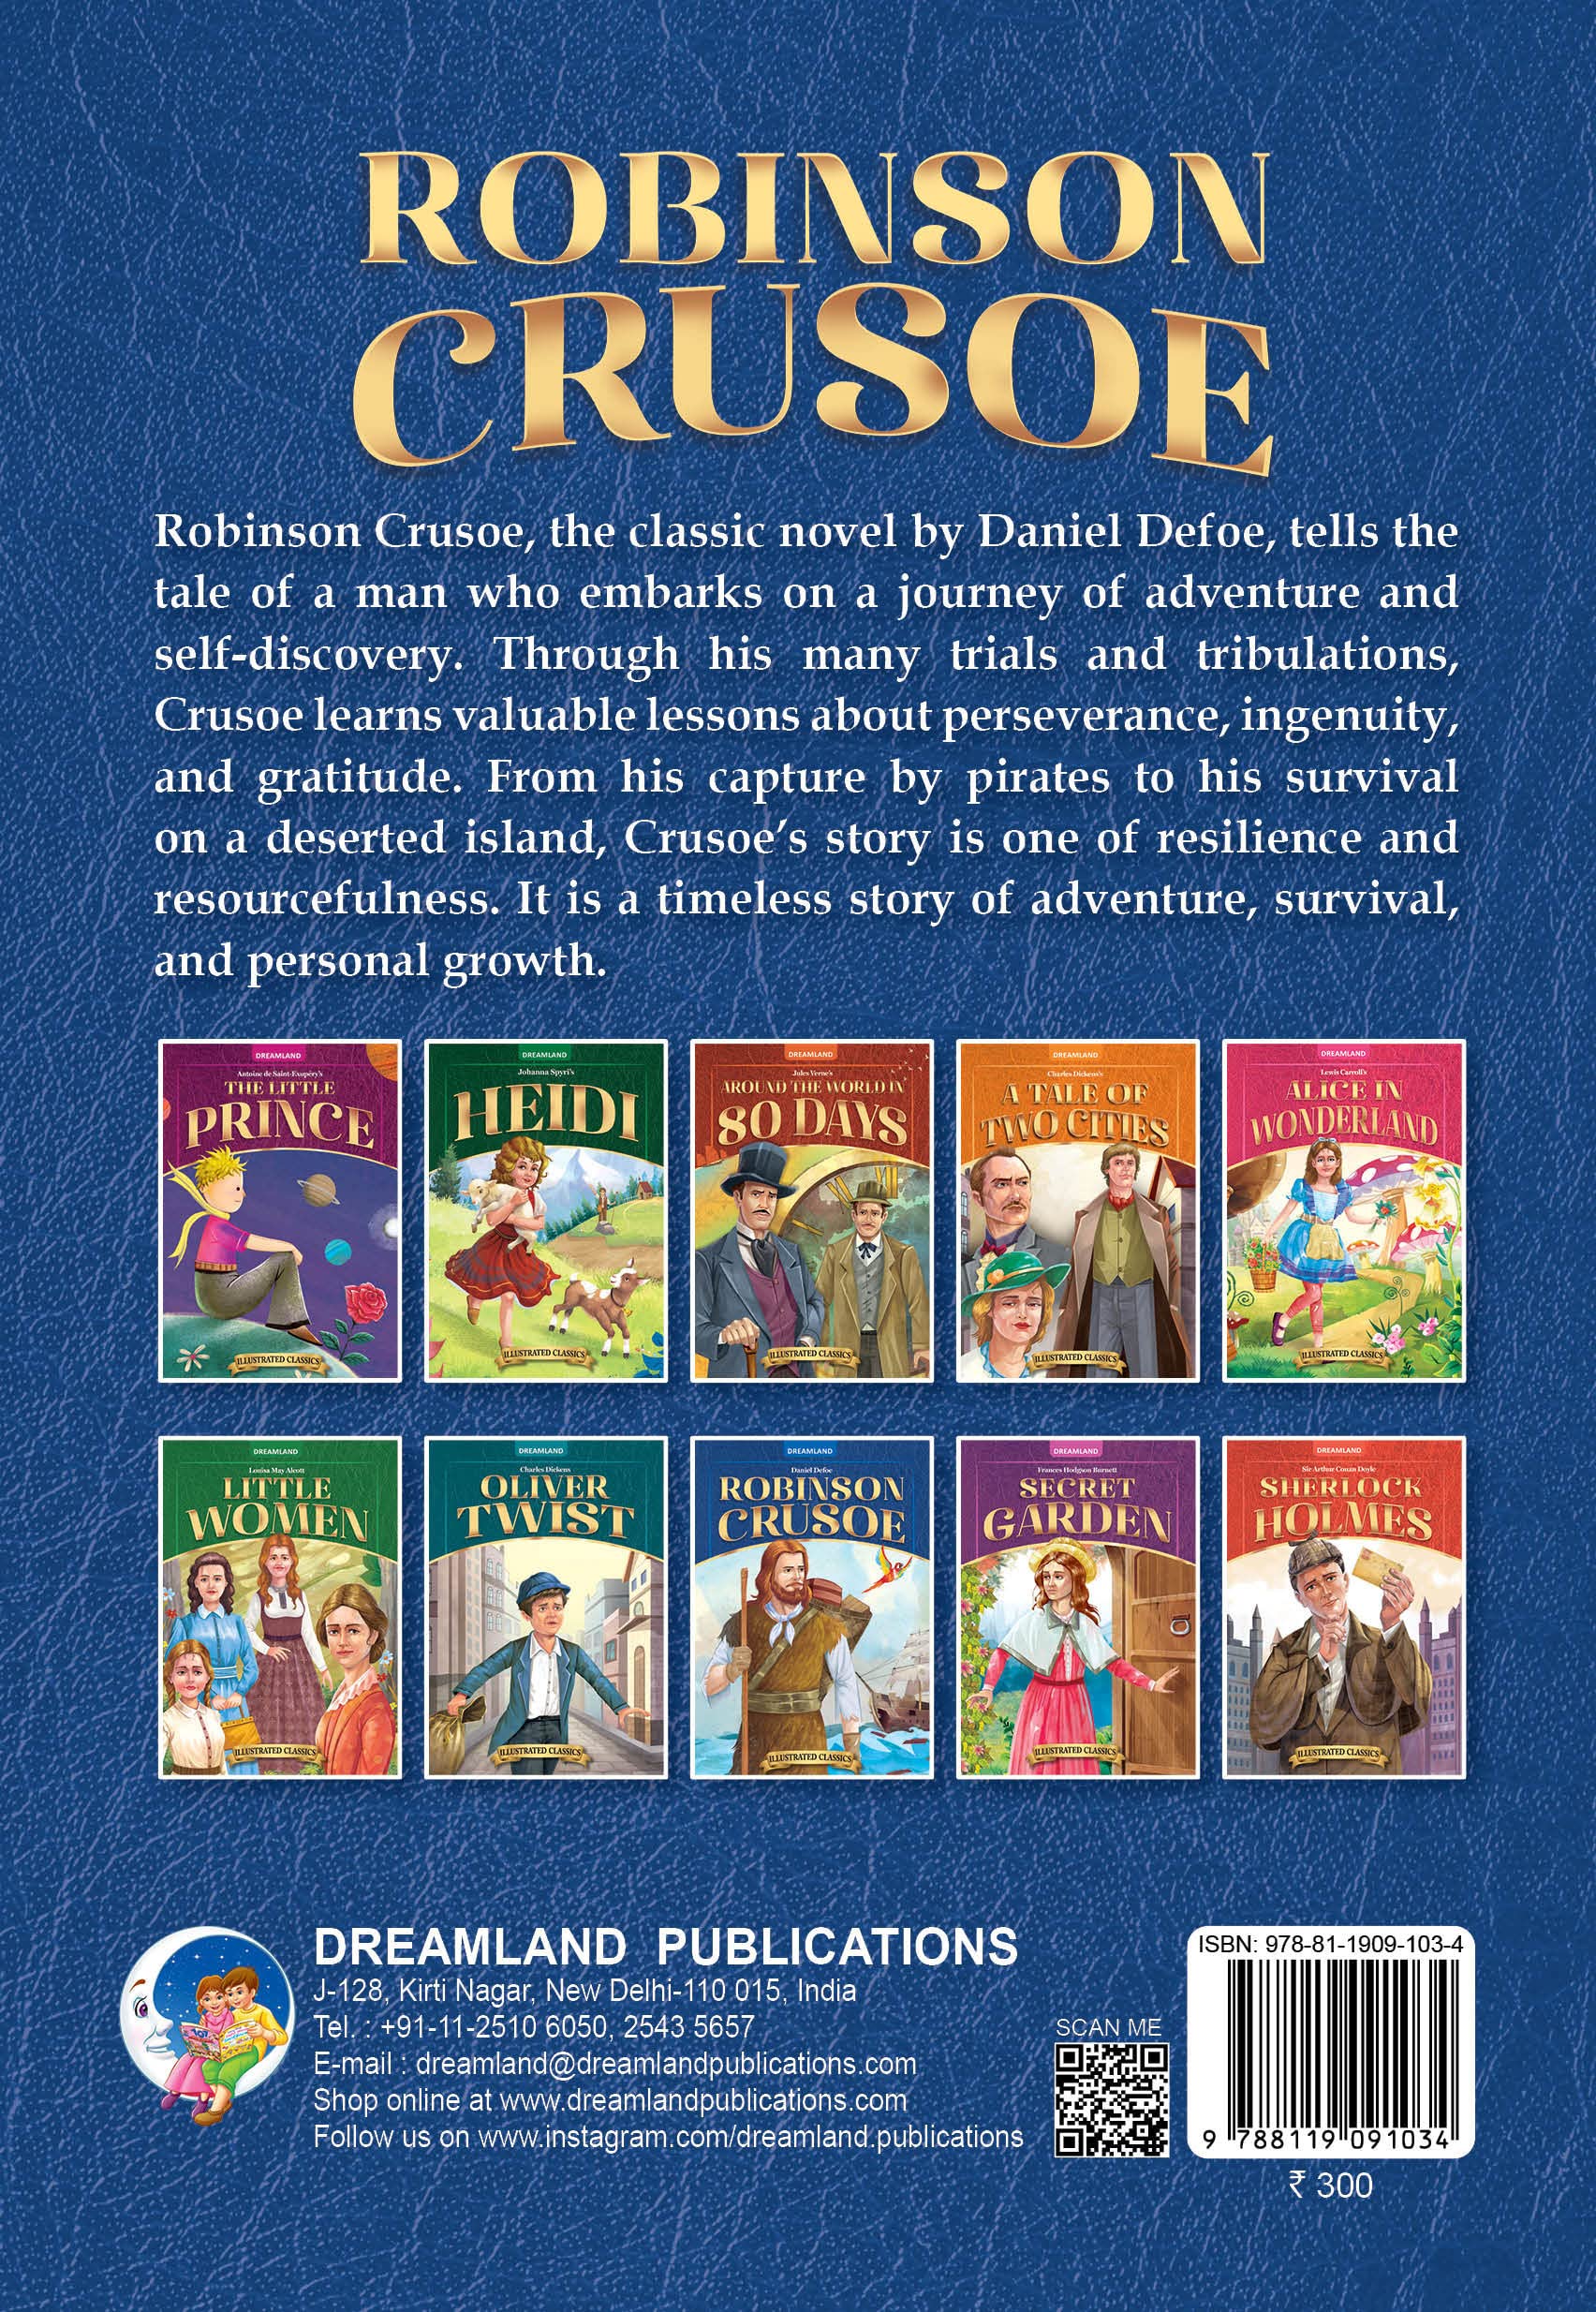 Dreamland Classic Tales Robinson Crusoe - llustrated Abridged Classics for Children with Practice Questions